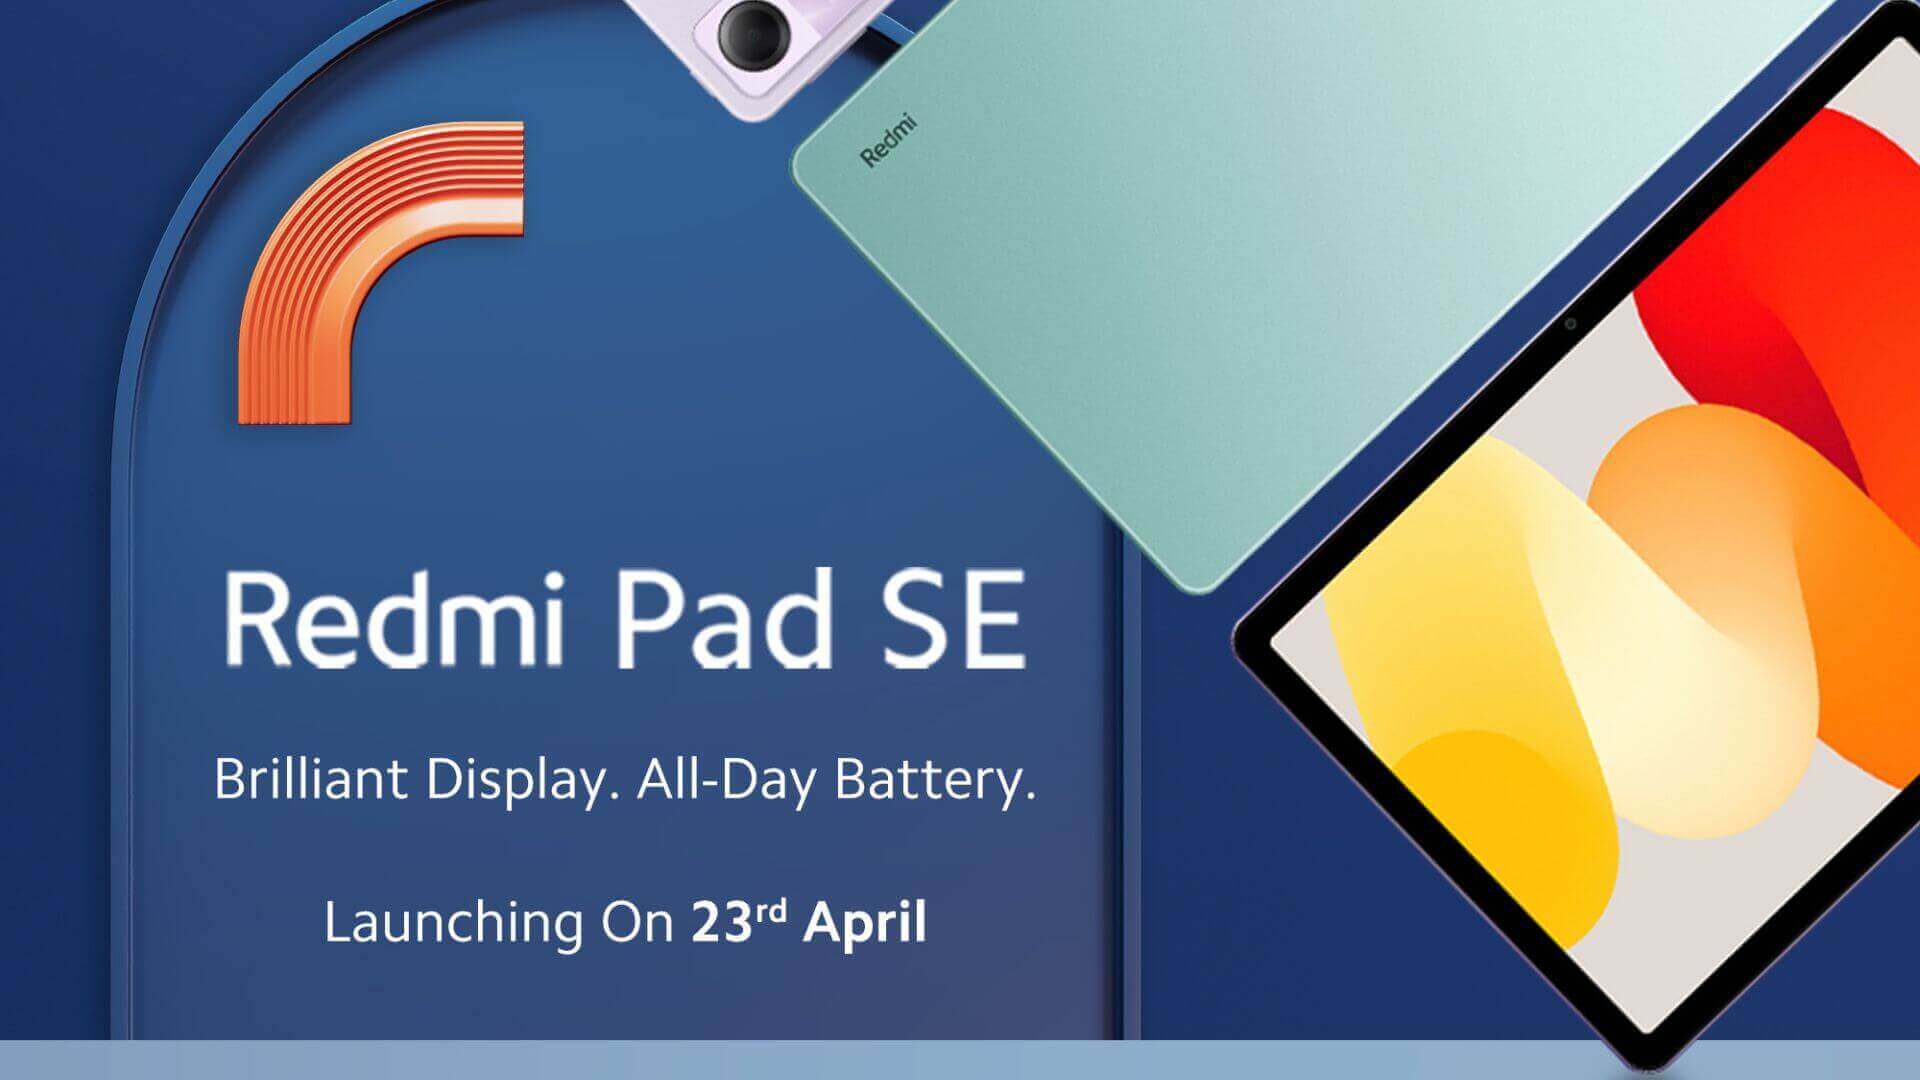 Redmi Pad SE to hit Indian markets on April 23 (Image Source: X/Xiaomi India)